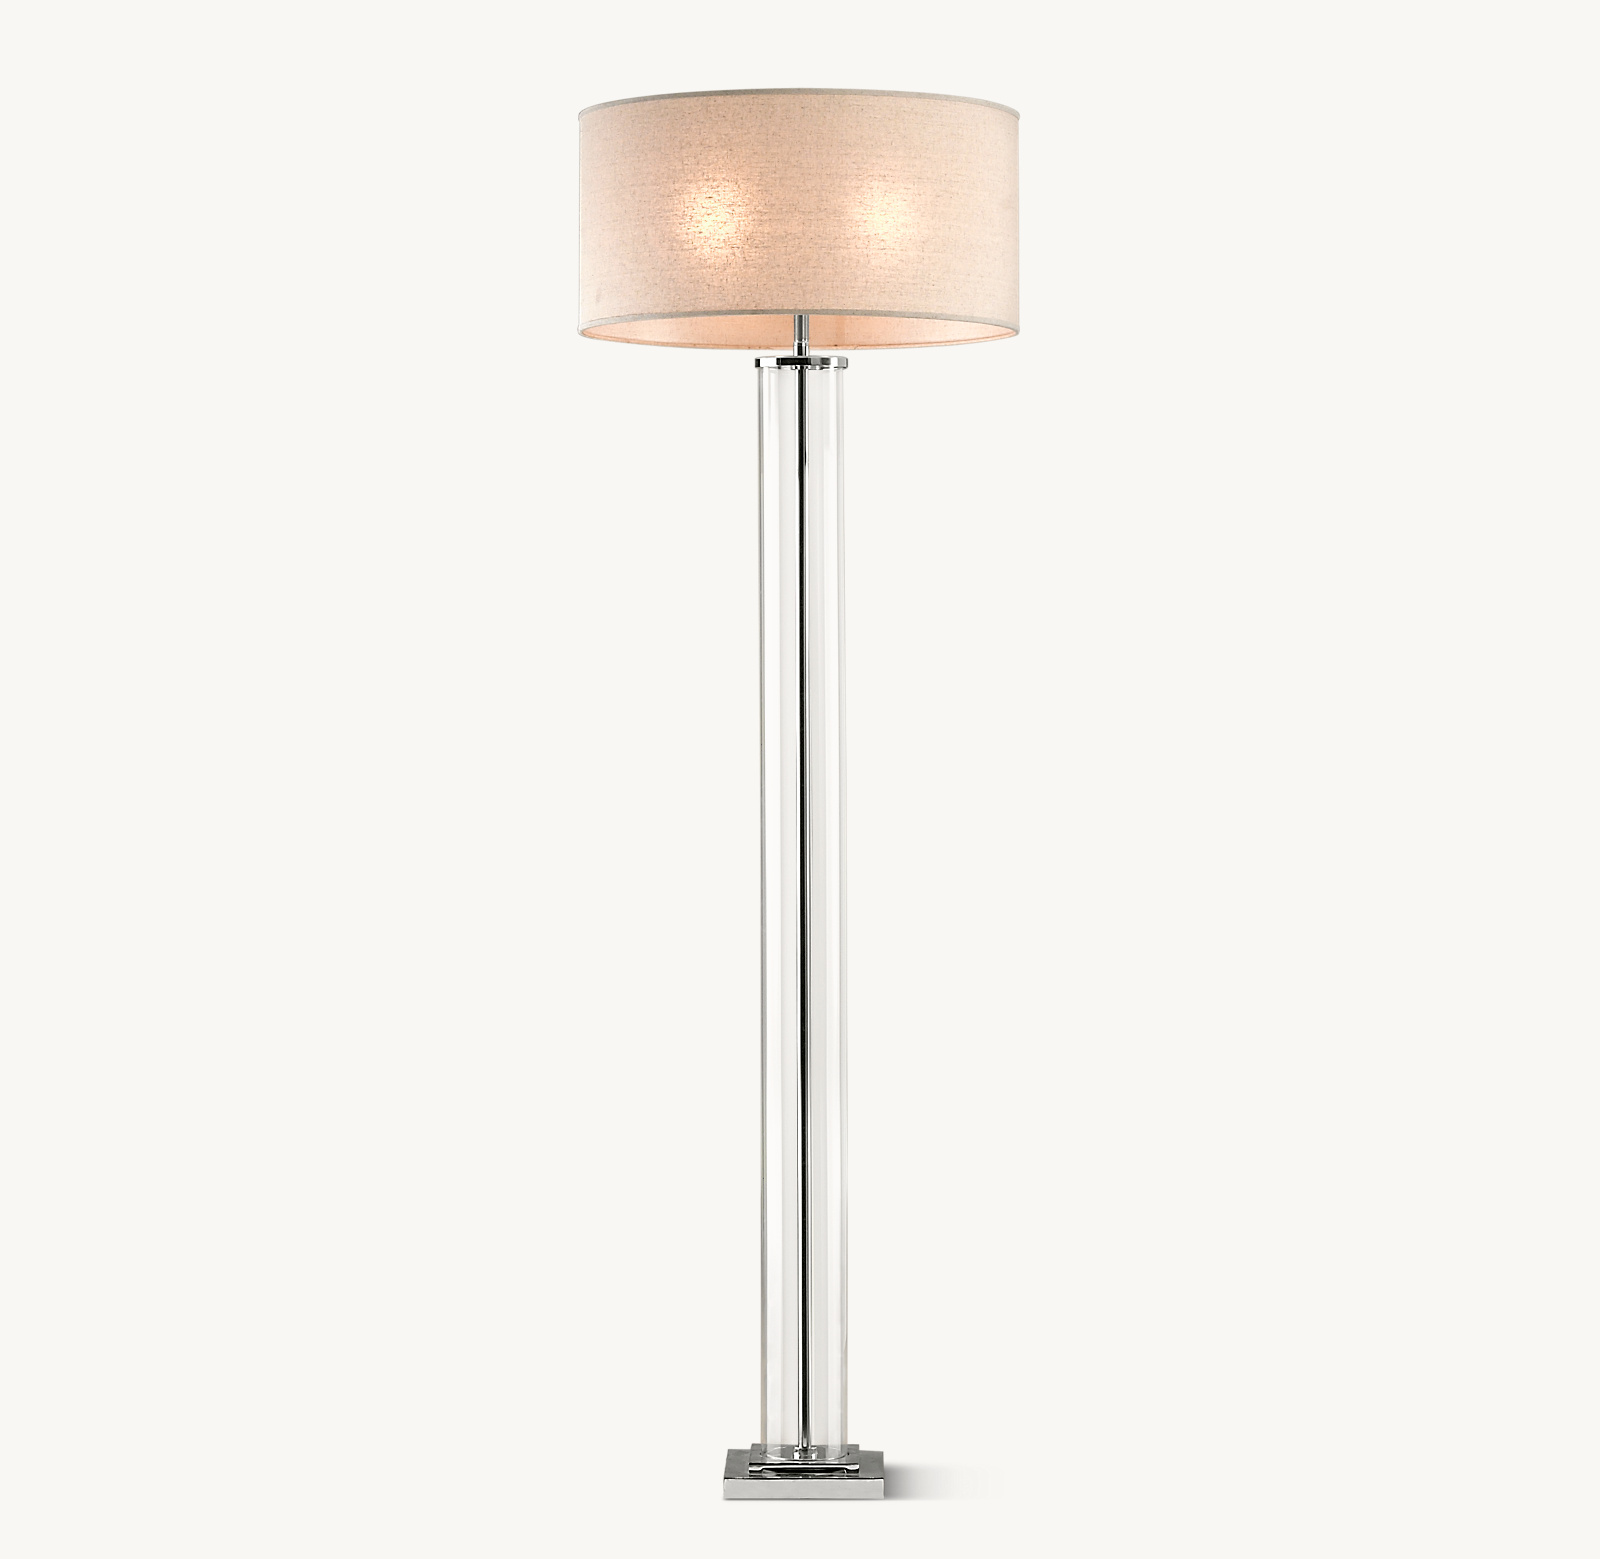 Shown in Polished Nickel with French Drum Linen Shade, size I, in White Linen and Frosted lining (sold separately).